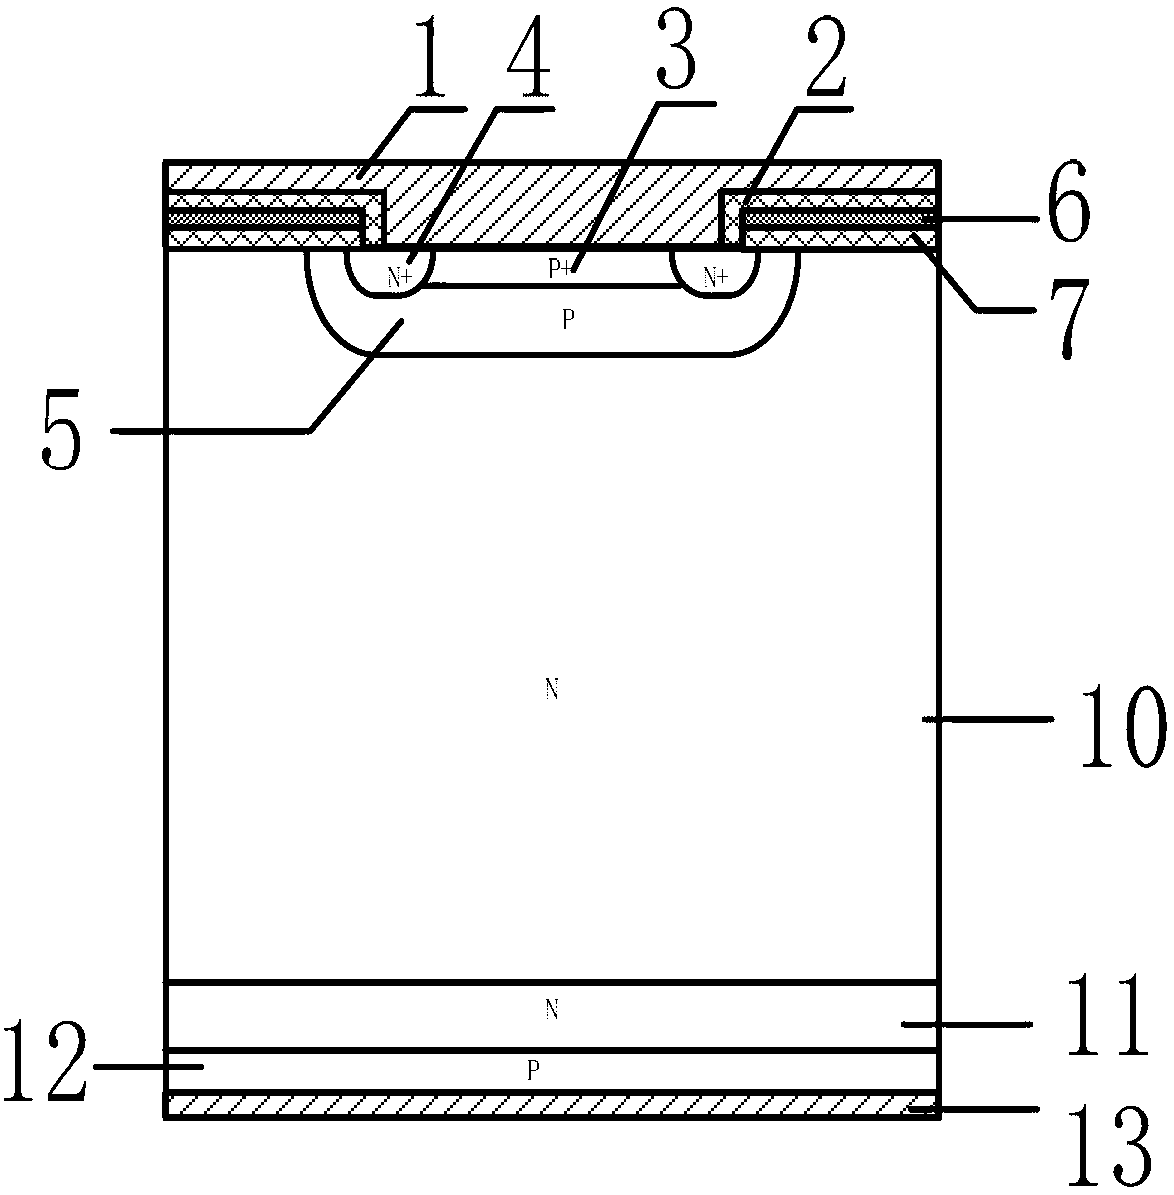 Insulated-gate bipolar transistor with embedded island structure